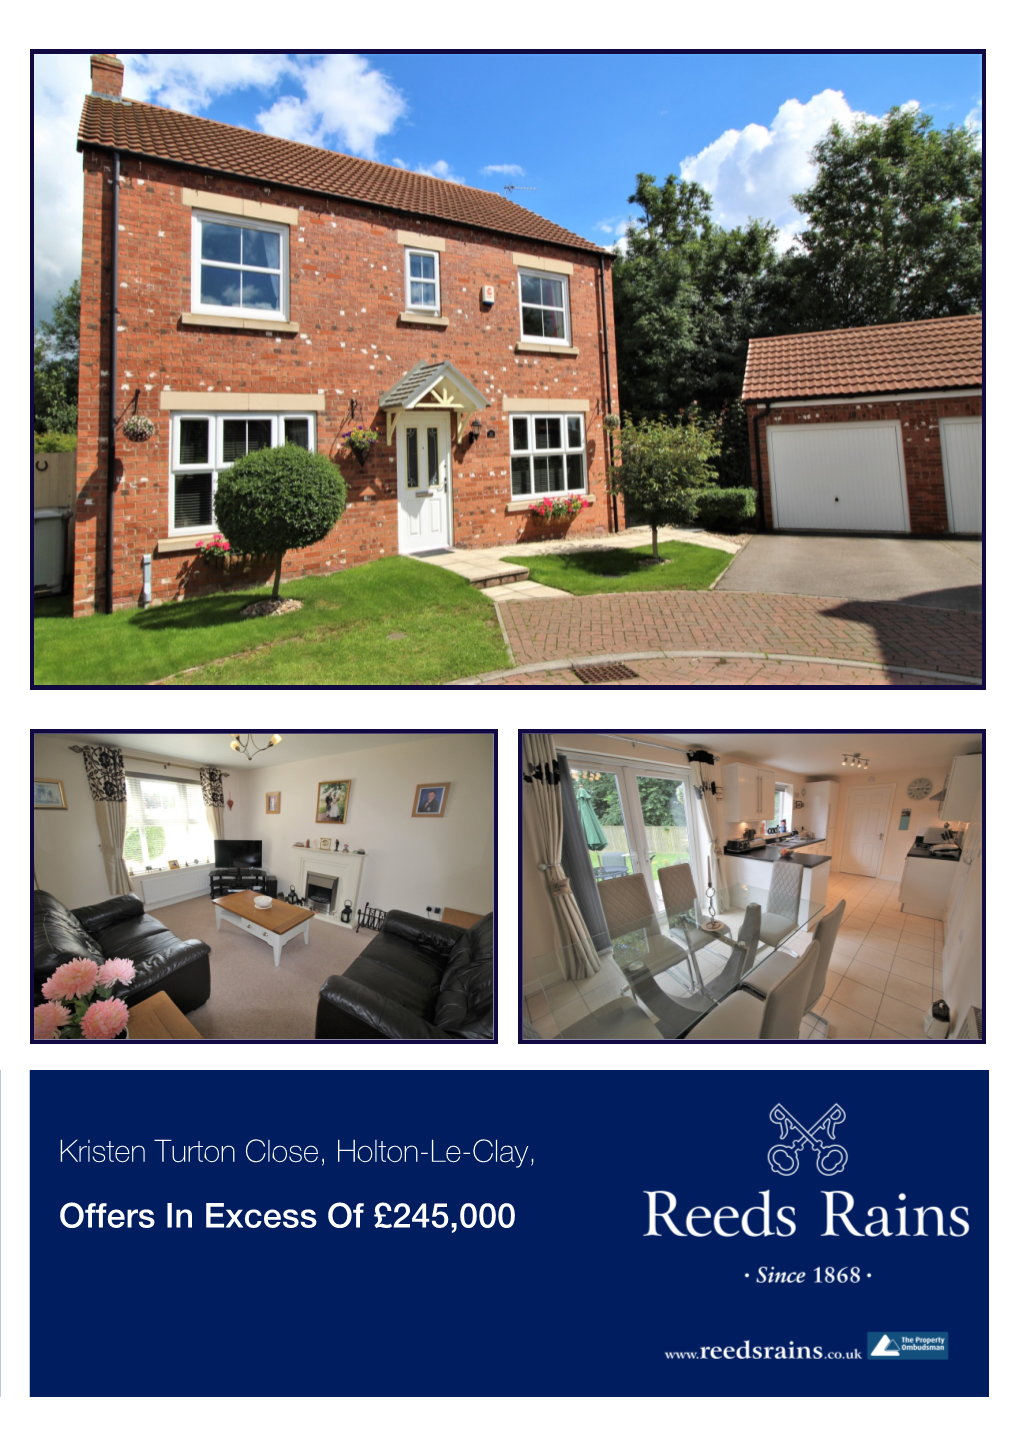 Offers in Excess of £245,000 Kristen Turton Close, Holton-Le-Clay, Grimsby, South Humberside Offers in Excess of £245,000